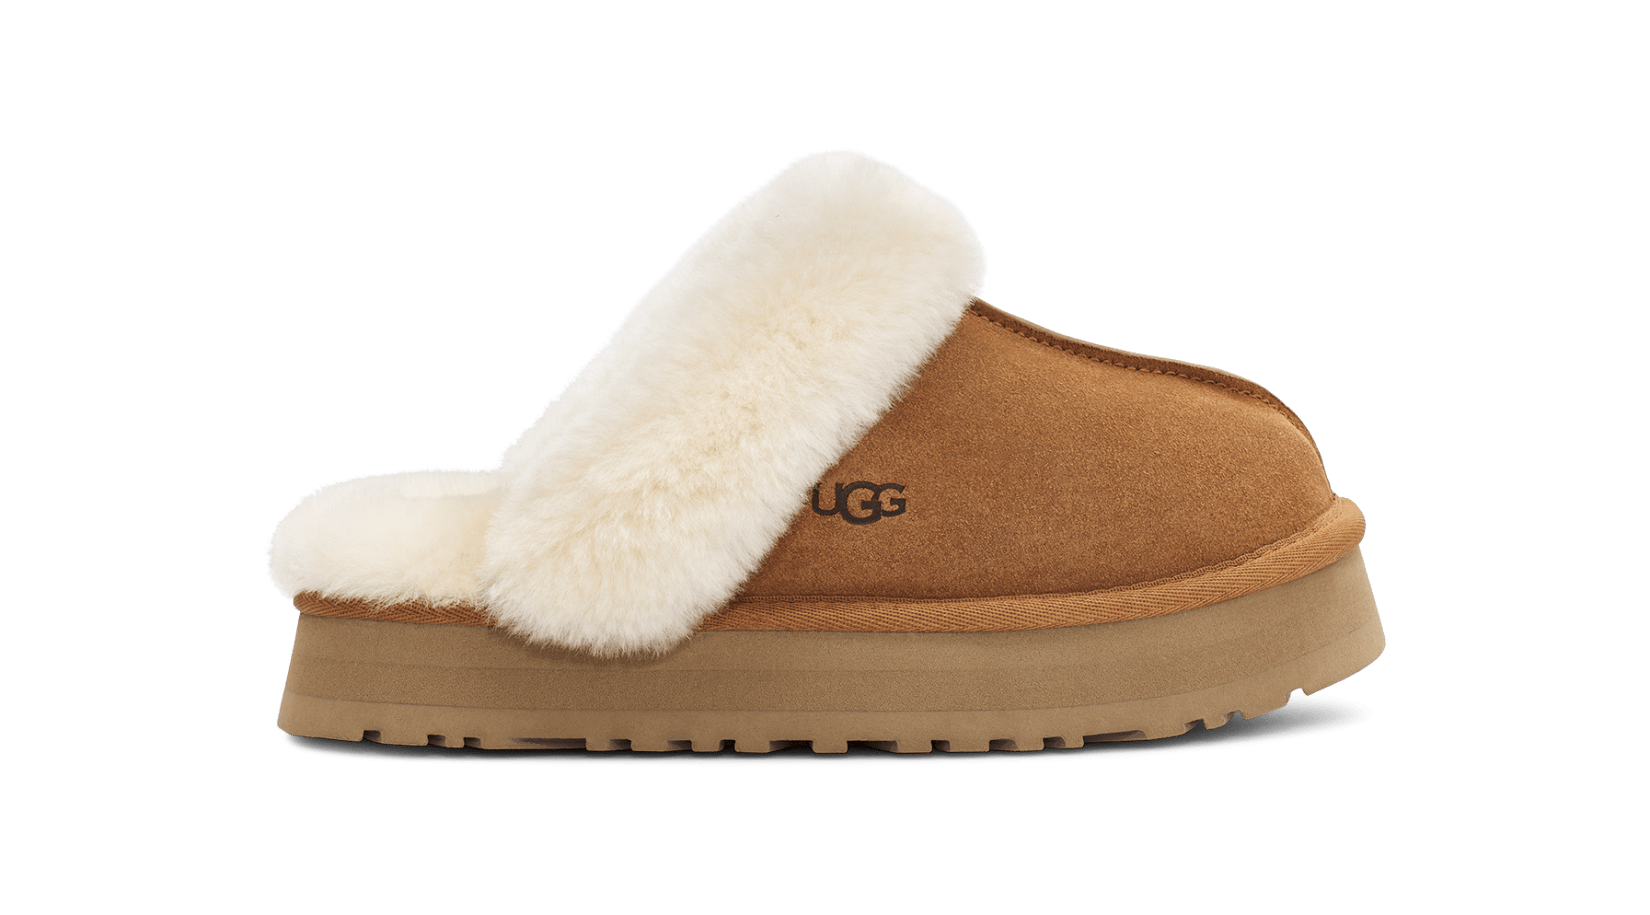 Womens Moccasin Slippers Flash Sales - www.ladyg.co.uk 1695819918